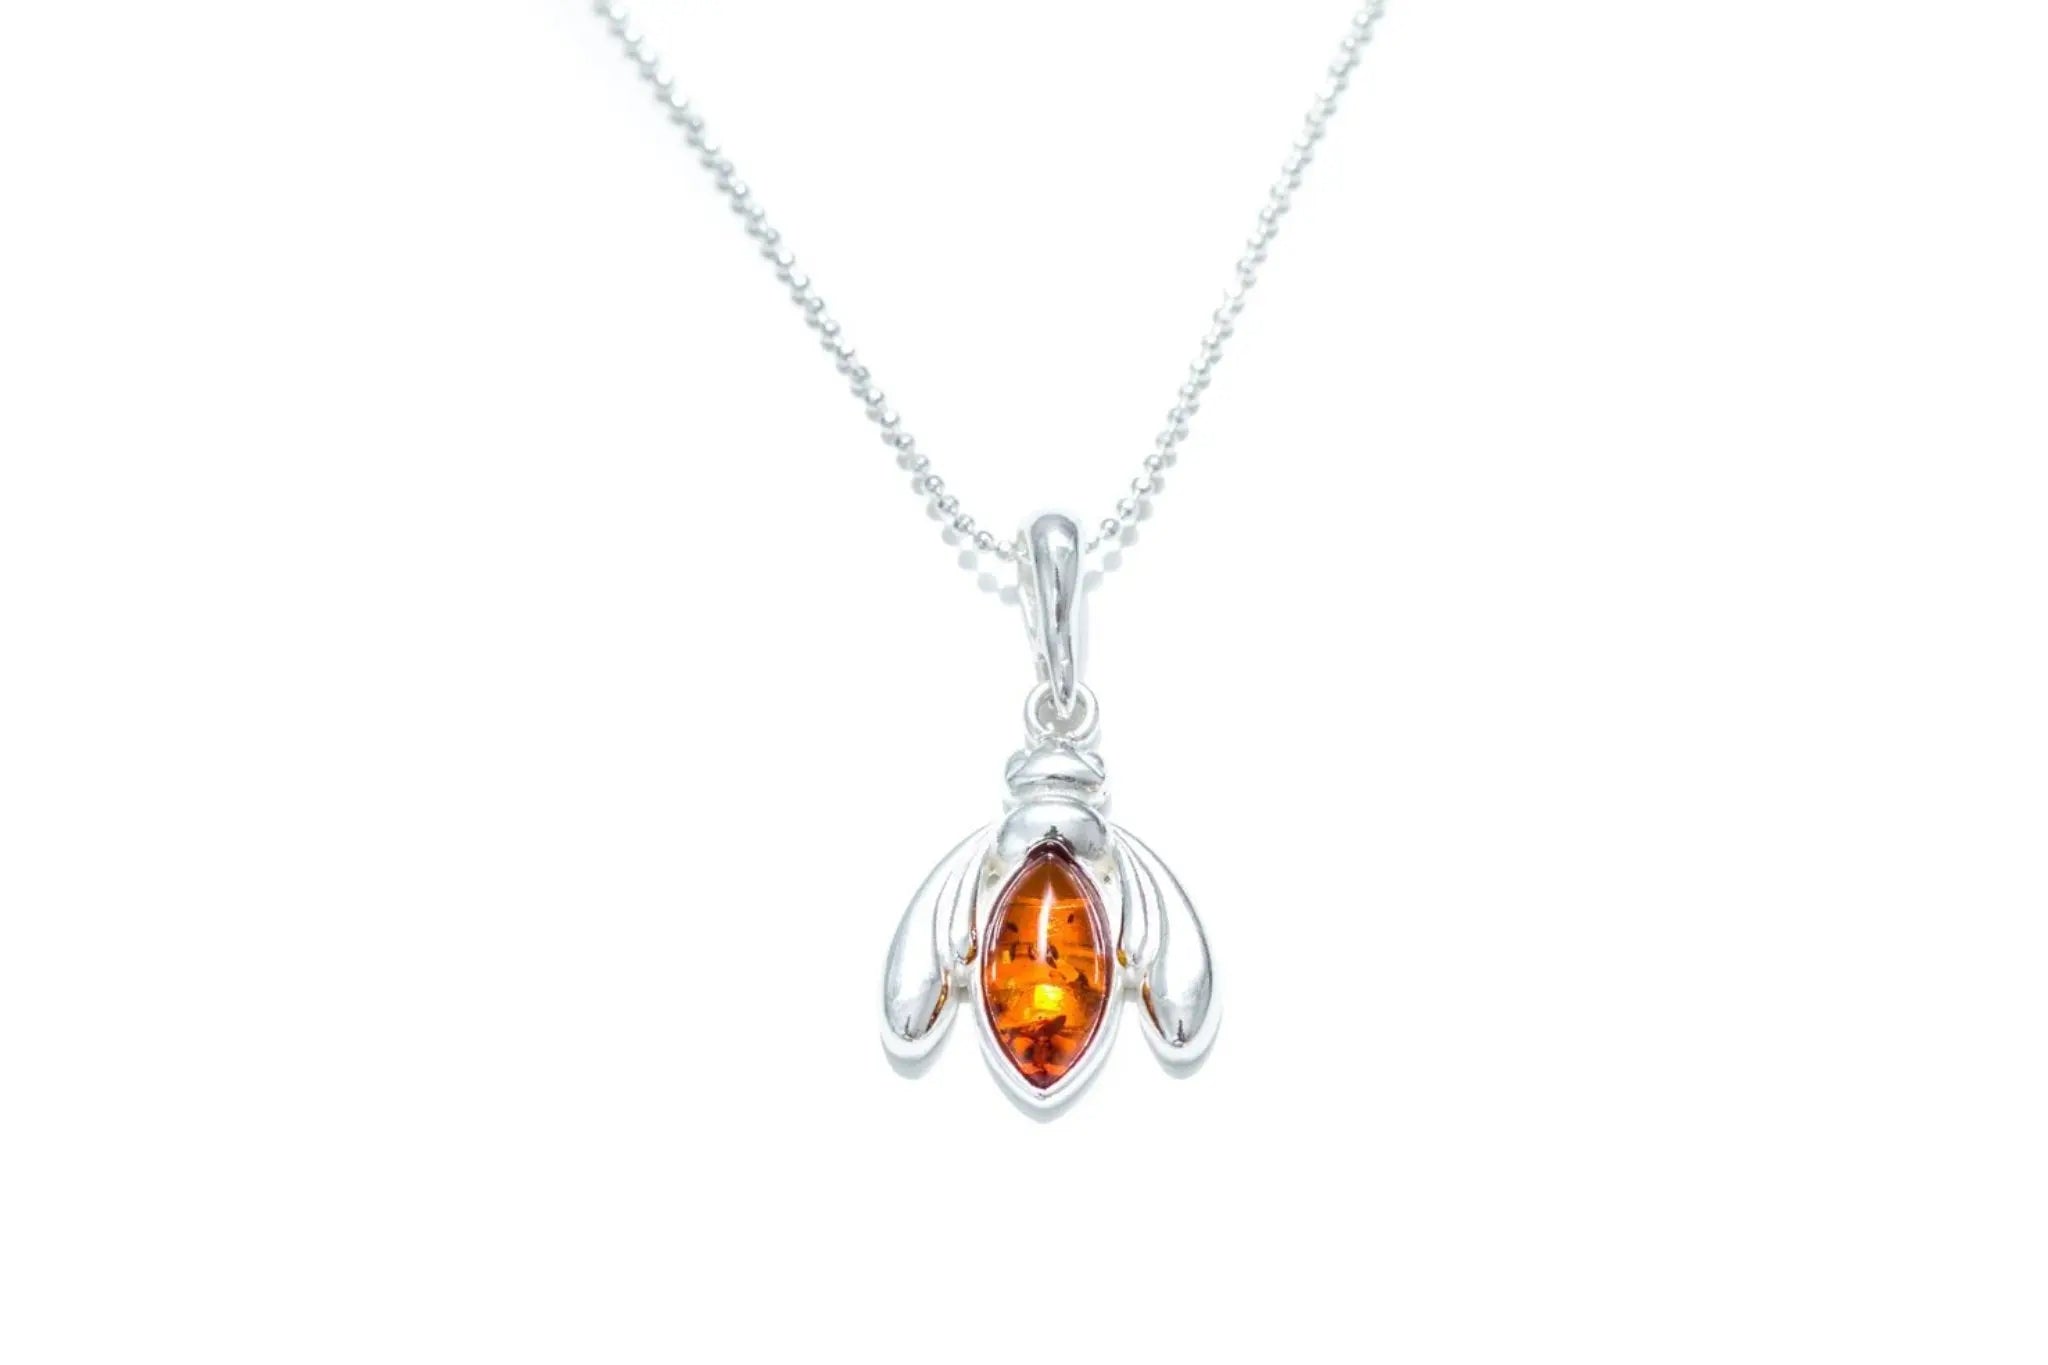 Amber Bumble Bee Charm Necklace- Necklaces- Baltic Beauty